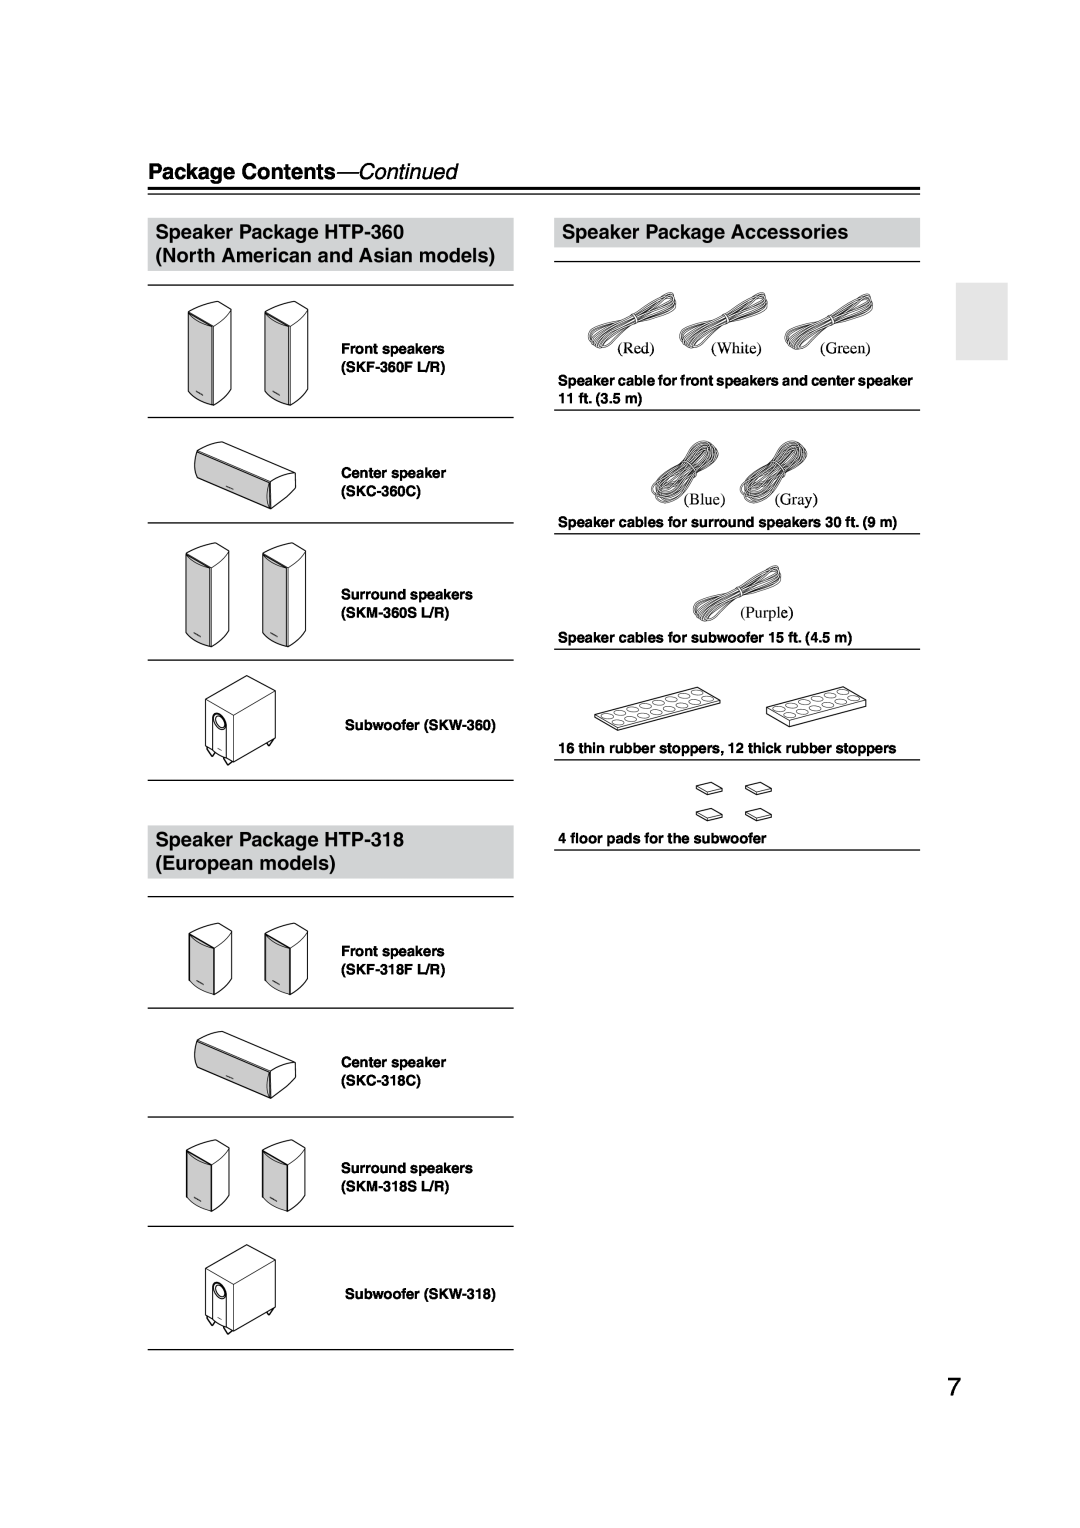 Onkyo Package Contents-Continued, Speaker Package HTP-360, North American and Asian models, Speaker Package Accessories 